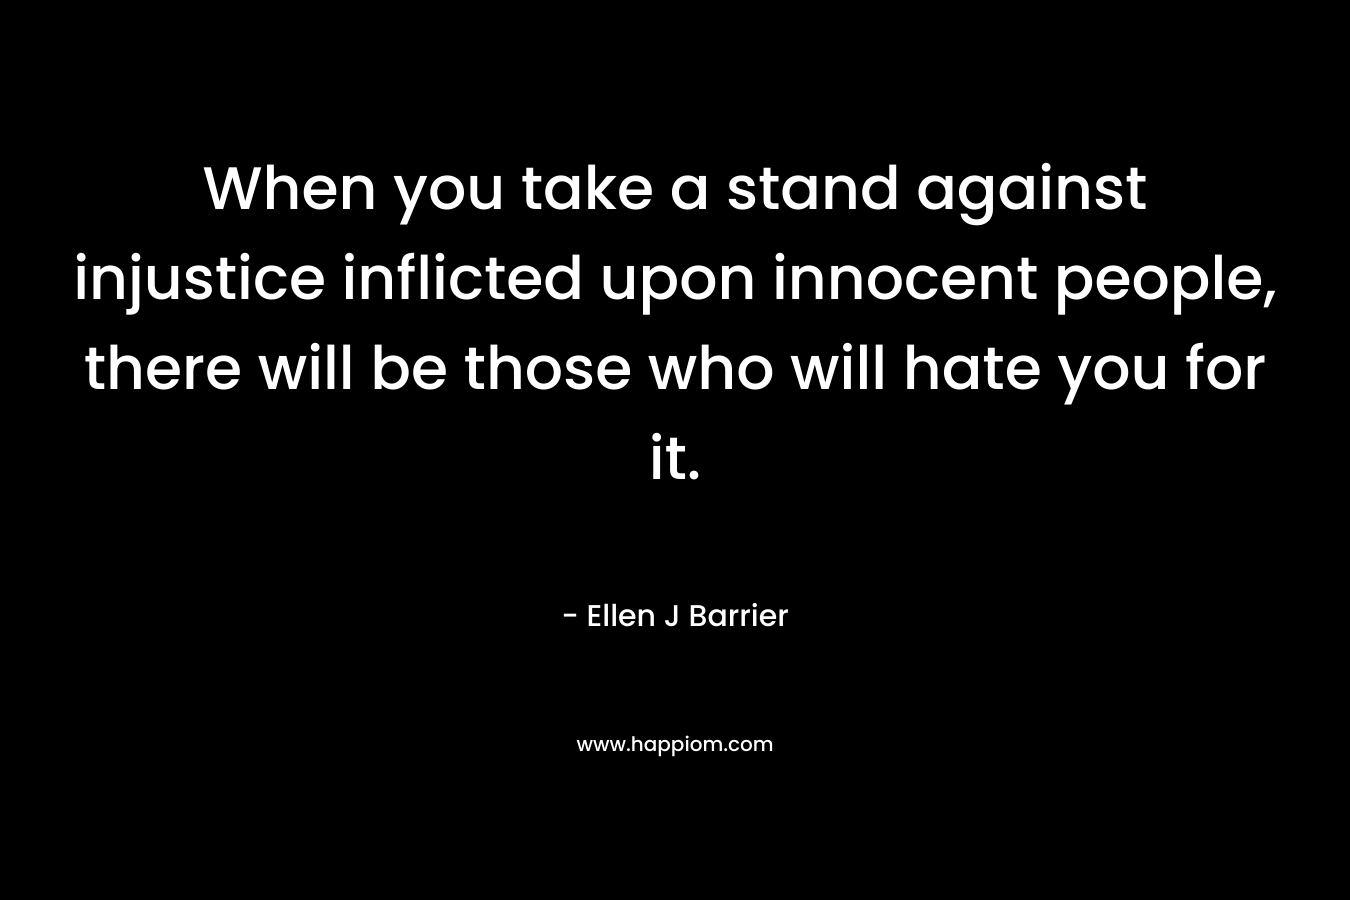 When you take a stand against injustice inflicted upon innocent people, there will be those who will hate you for it. – Ellen J Barrier